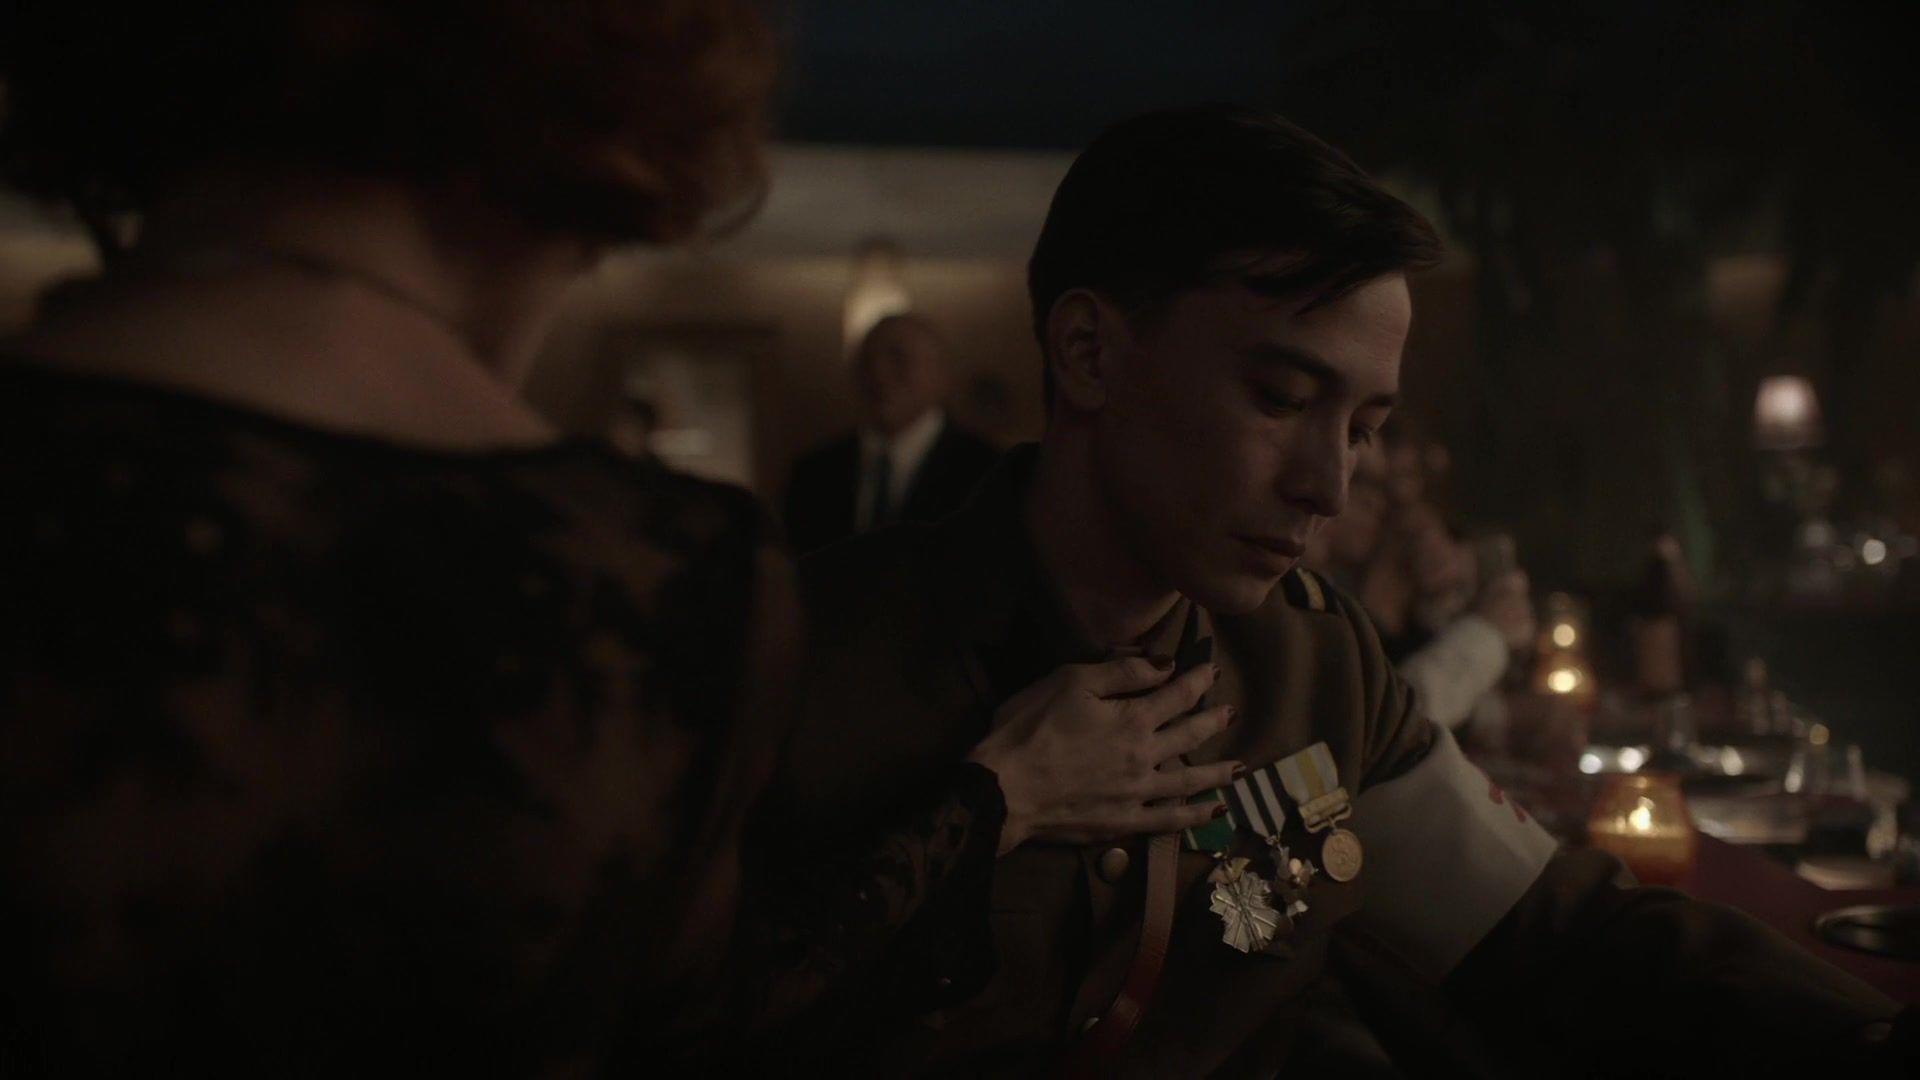 Married Nude Destiny Millns - The Man in the High Castle s04e03 (2019) Eva Notty